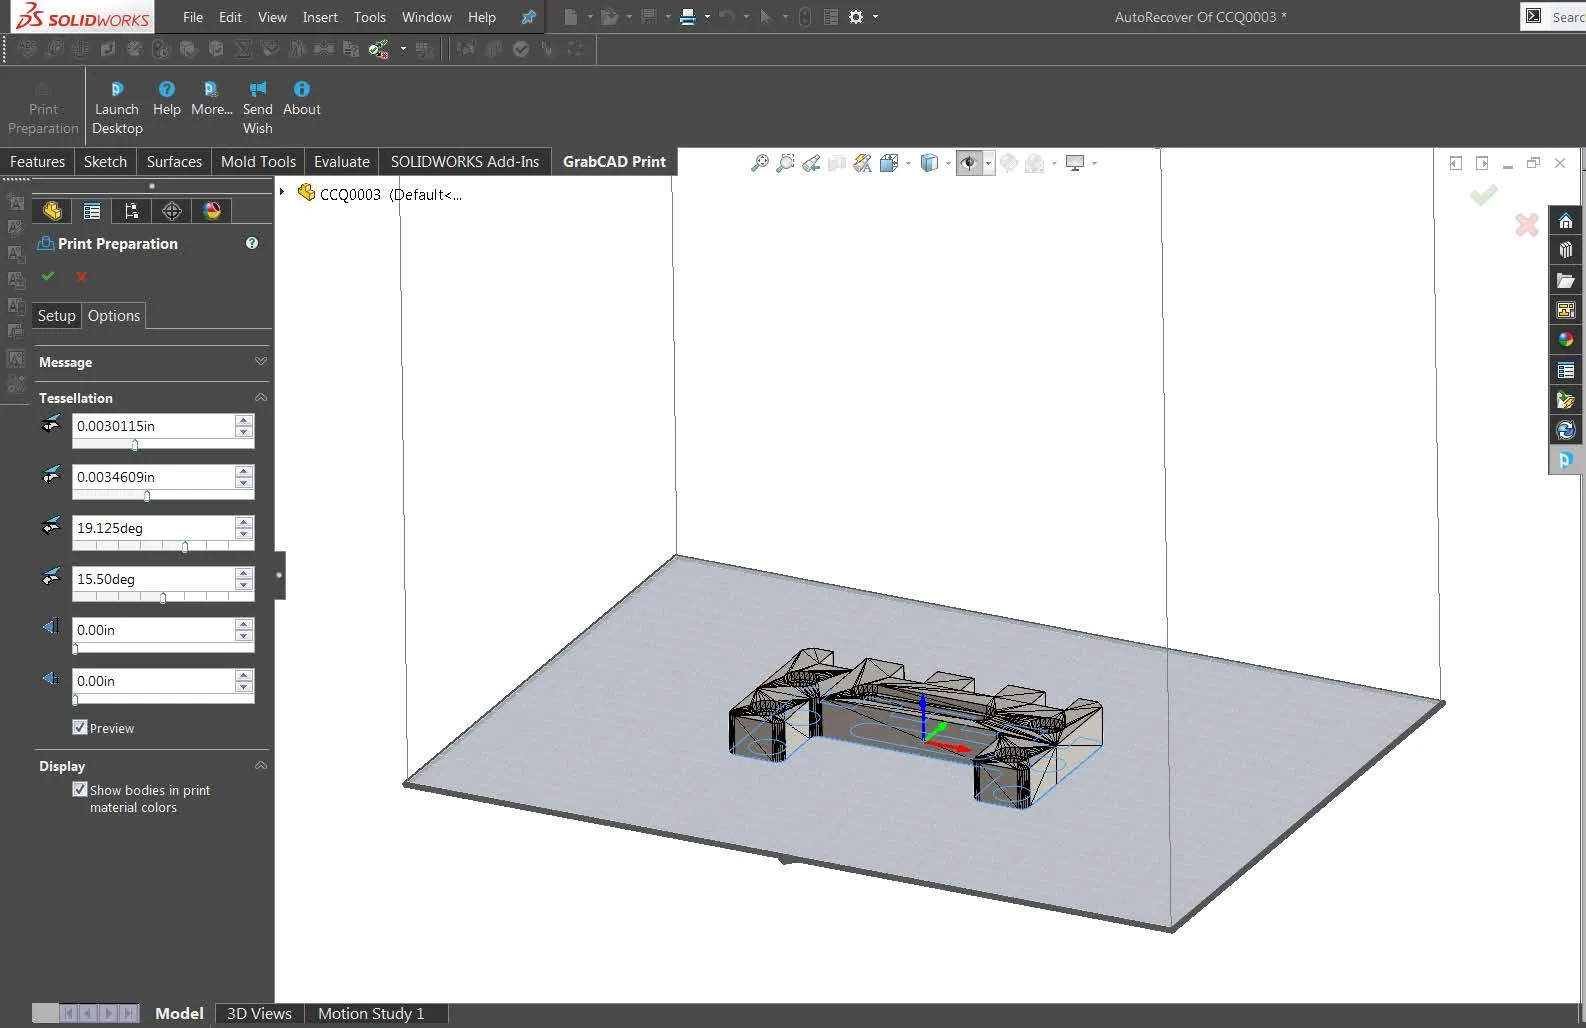 GrabCAD Print SOLIDWORKS Add-in Options